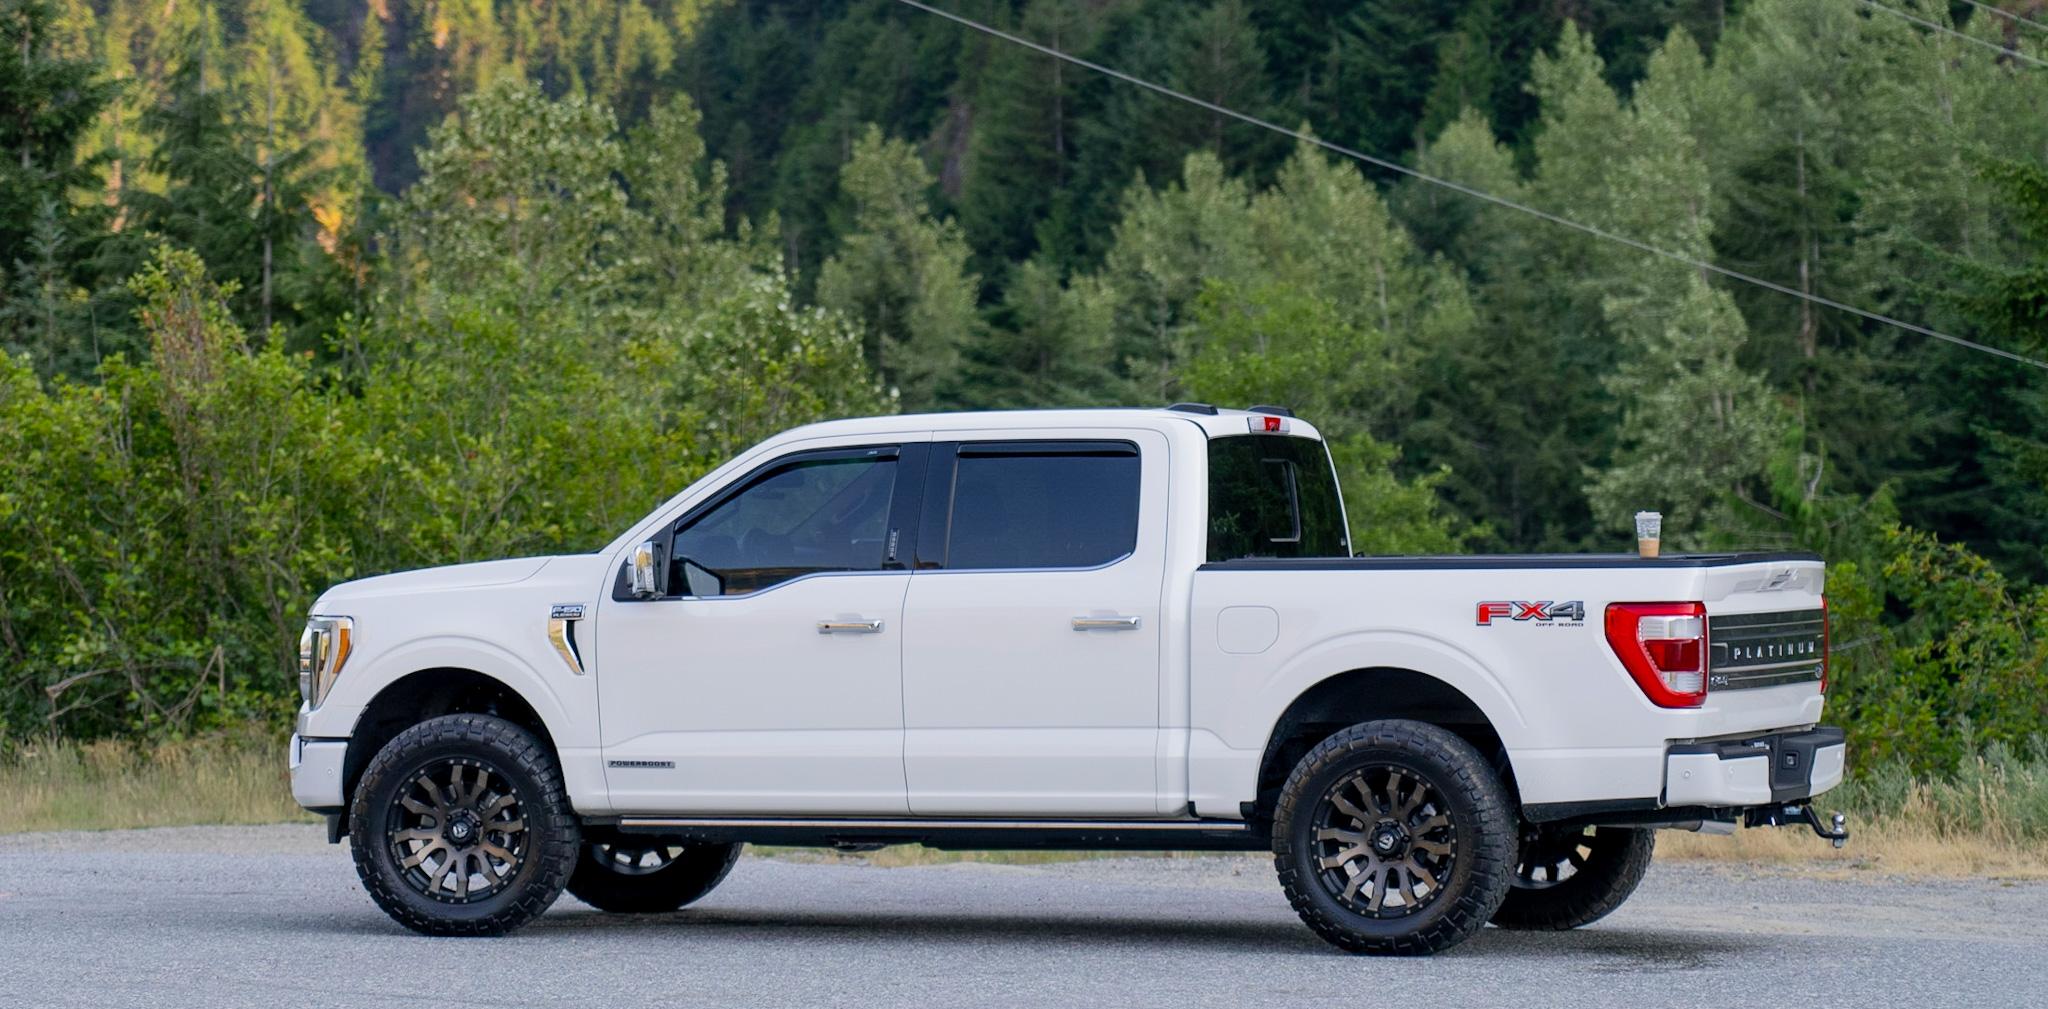 Ford F-150 Lightning ReadyLift 2" level, Fuel Rebel 20x9 (et +1), and Nitto Recon Grappler 295/60r20 29294038-35DB-4411-9480-0A41B1AC1EE1